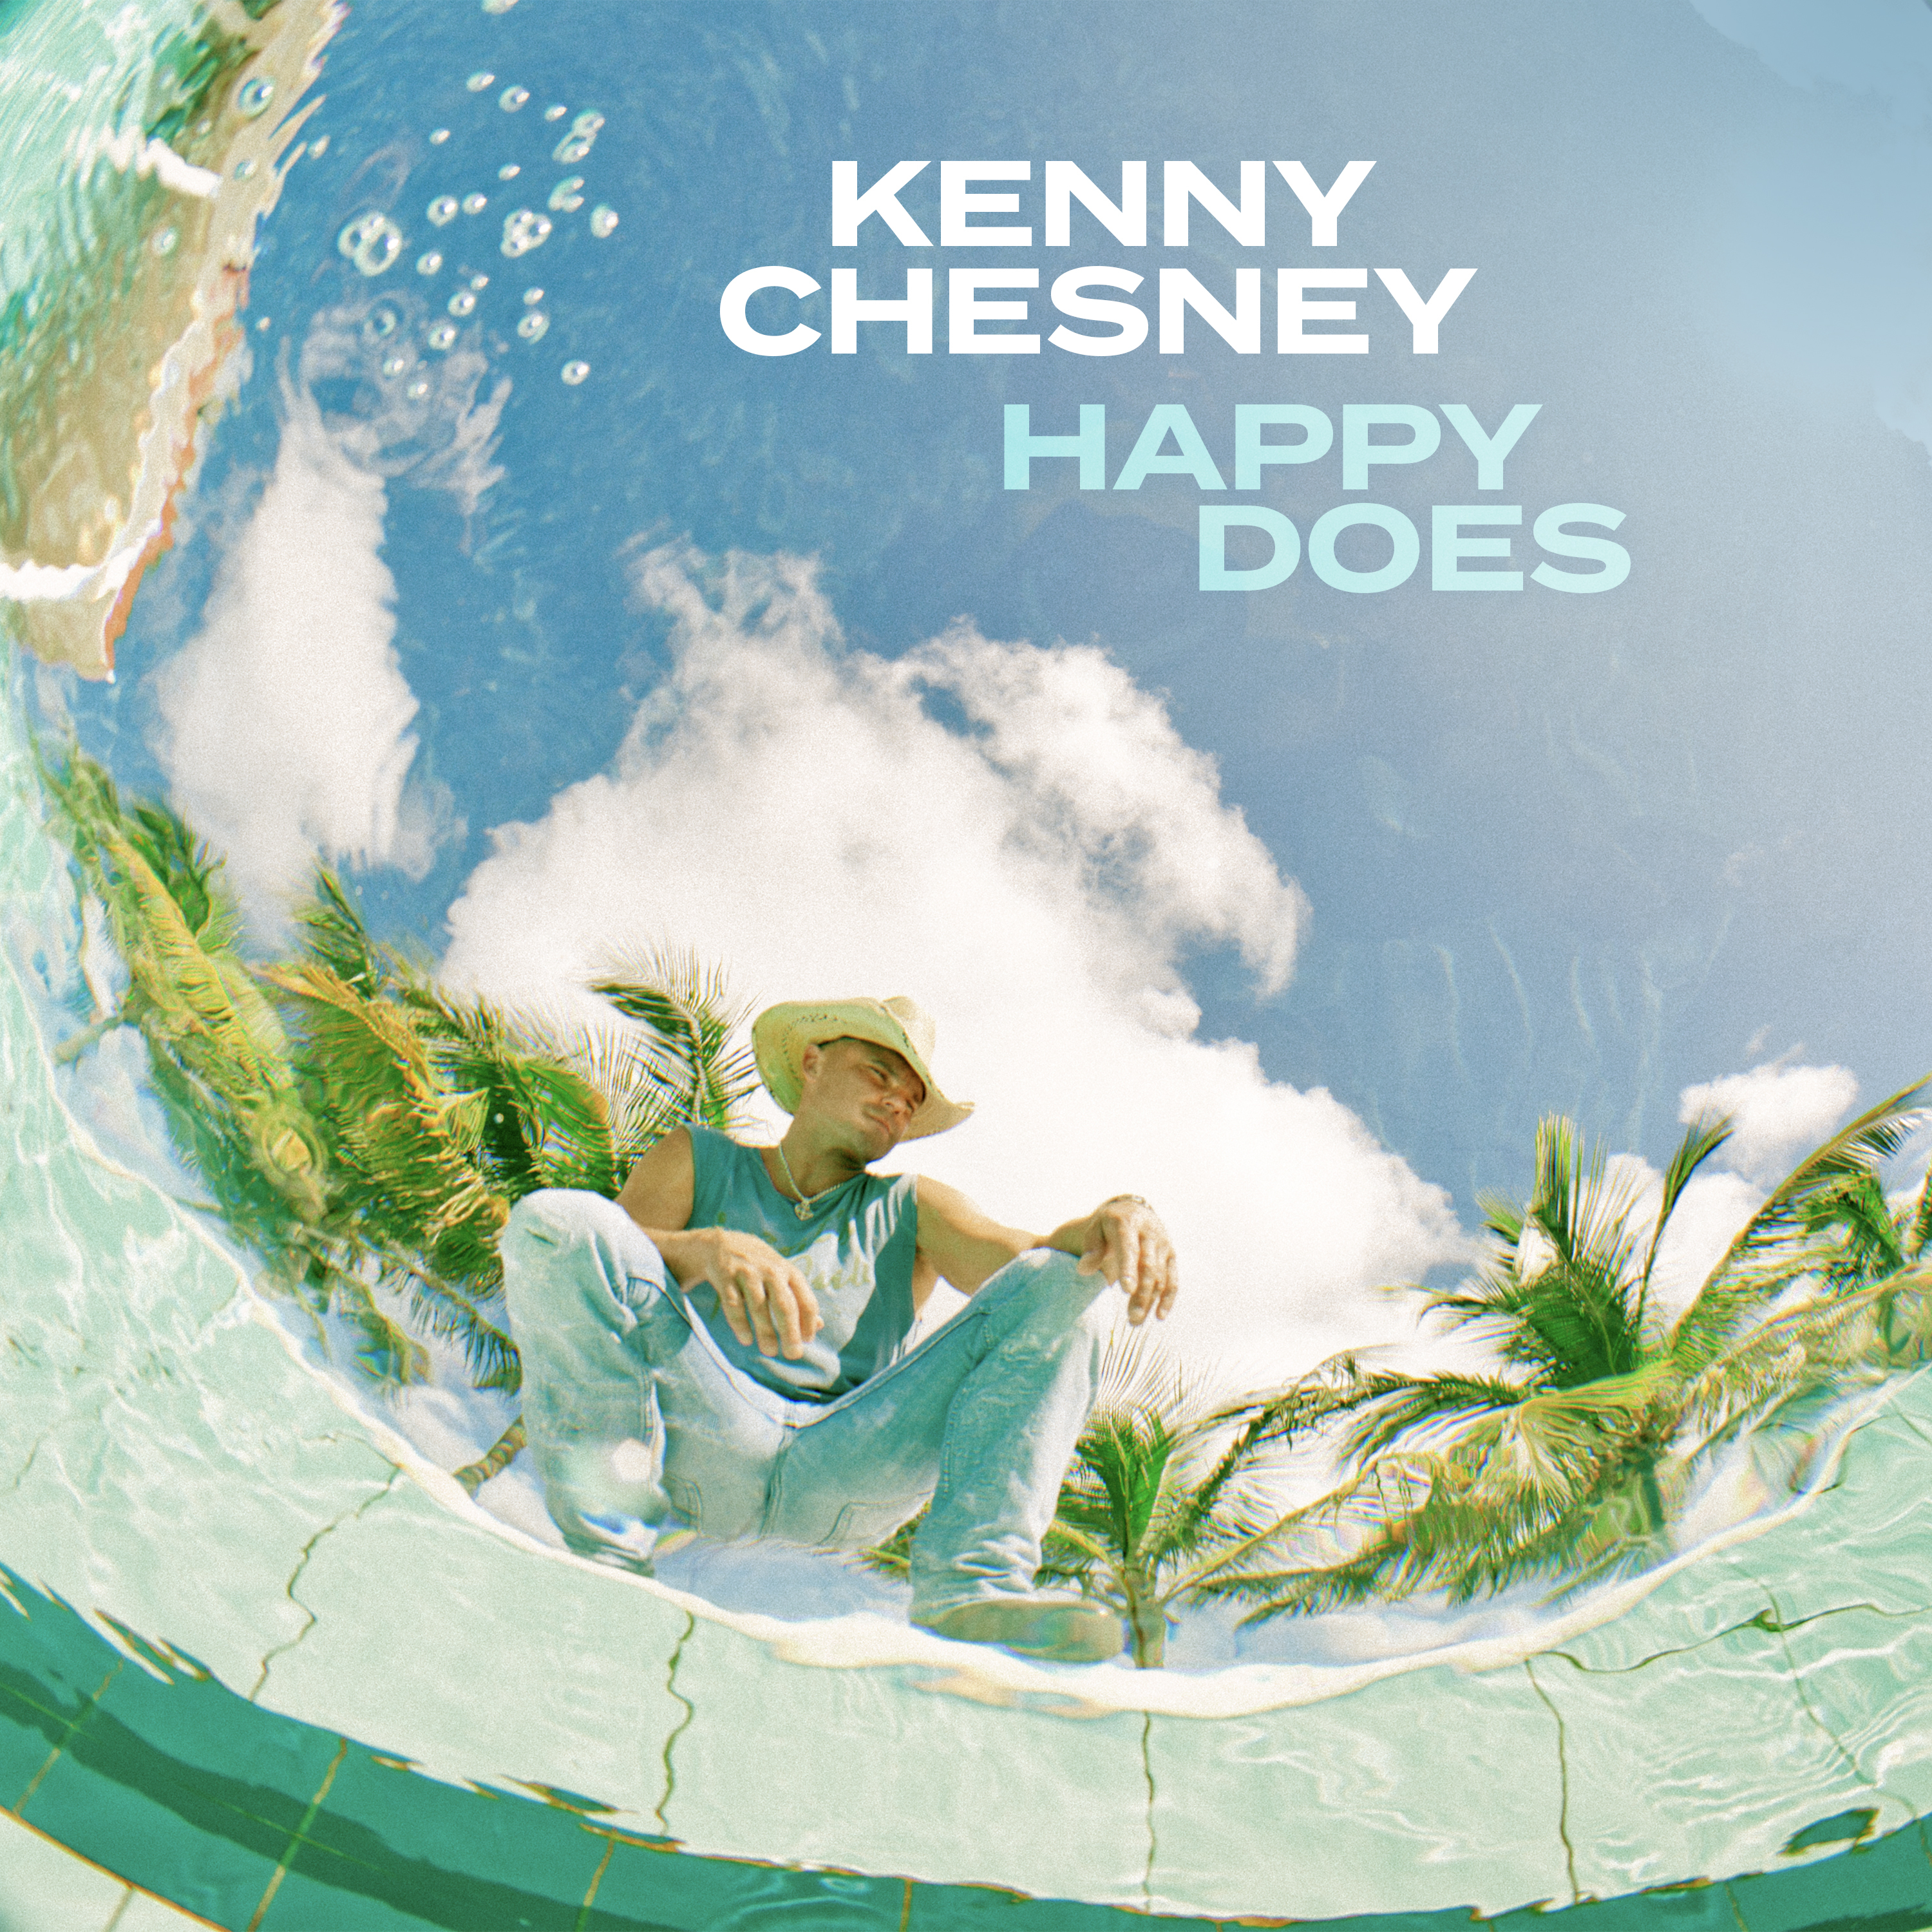 KENNY CHESNEY DROPS "HAPPY DOES," POSITIVE VIBE FOLLOW UP TO 31st NO. 1